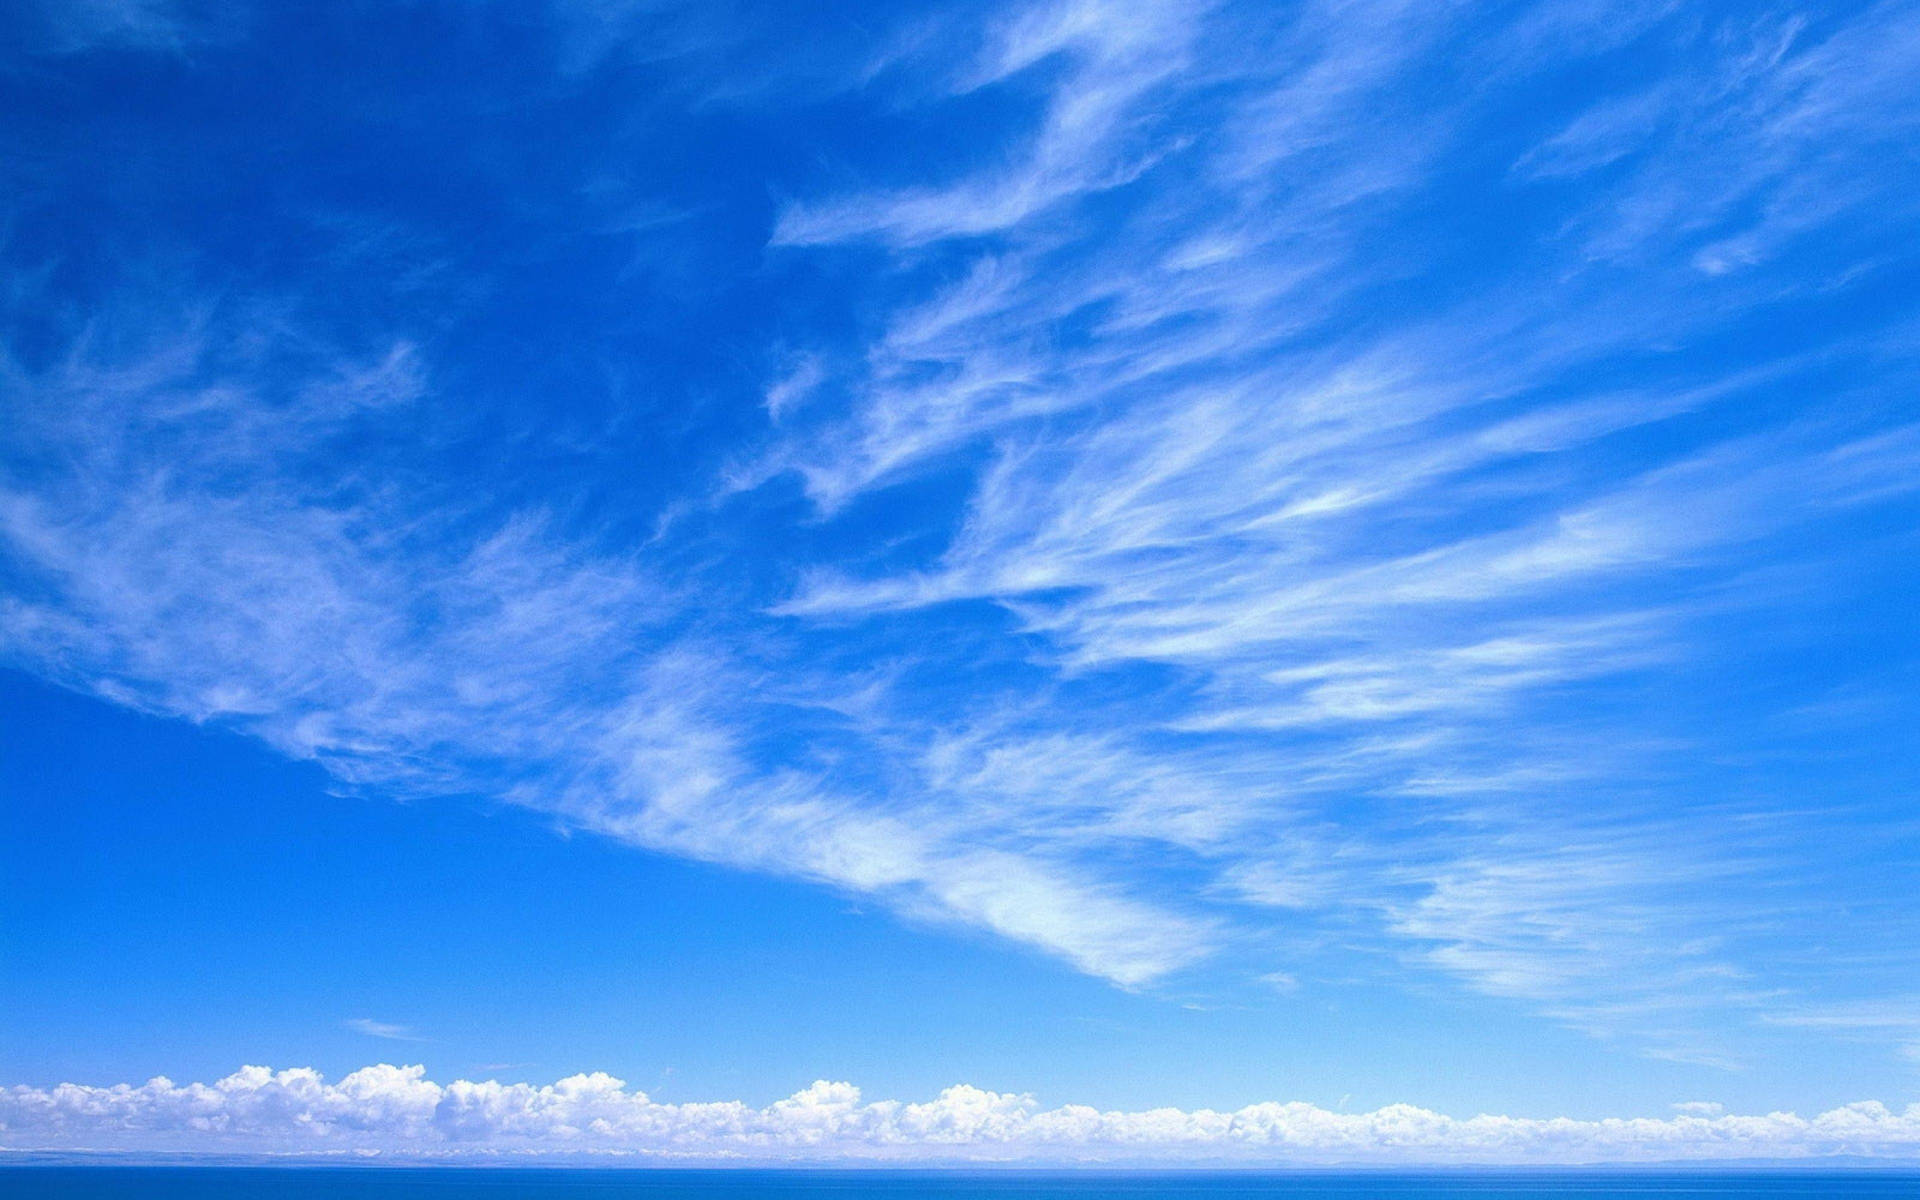 Clear Sky With Wispy Clouds Wallpaper